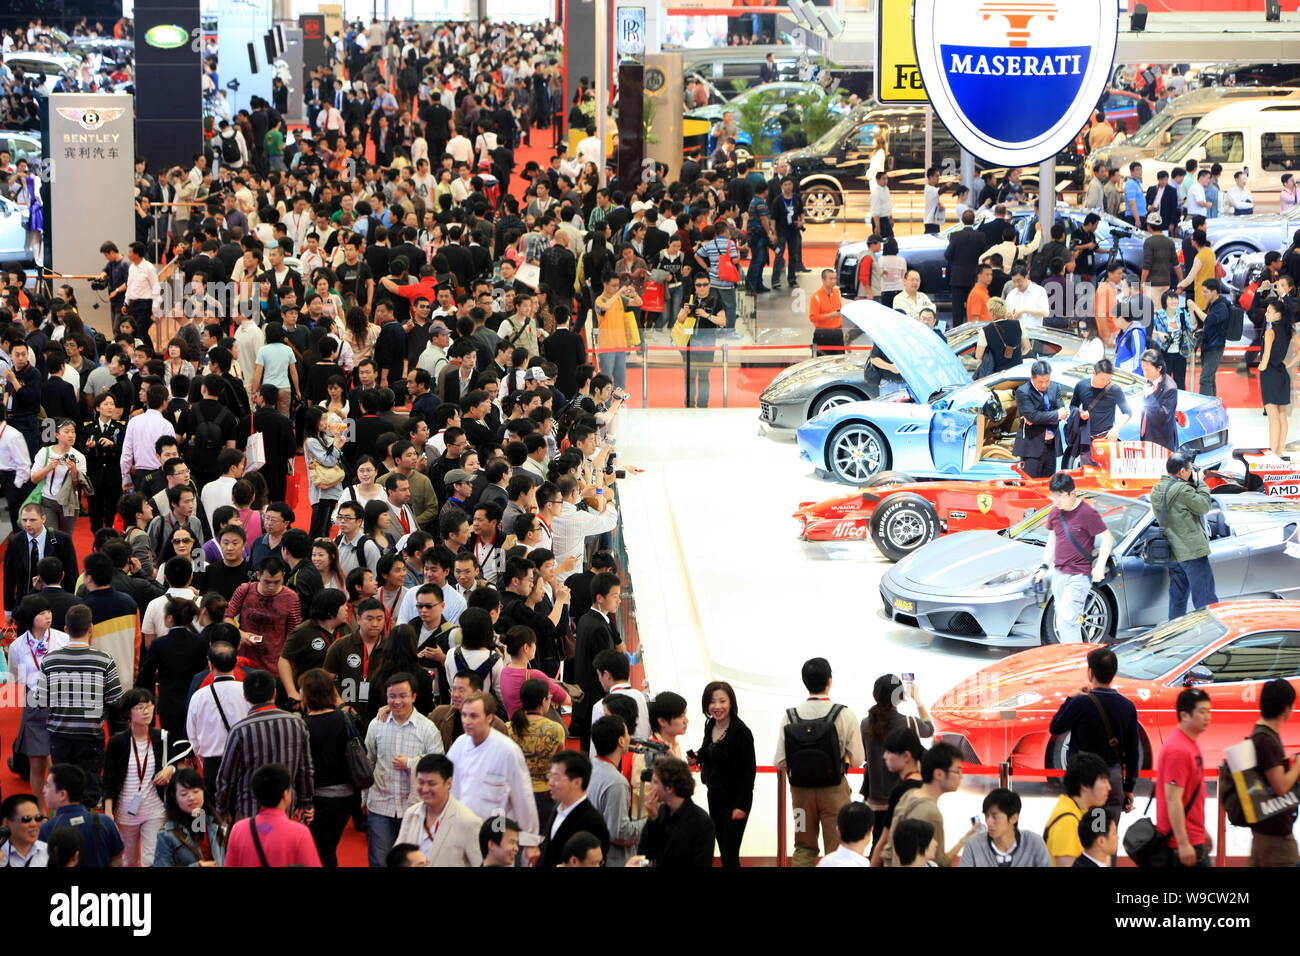 Crowds of visitors are seen at the stand of Ferrari and Mesarati during the 13th Shanghai International Automobile Industry Exhibition, known as Auto Stock Photo